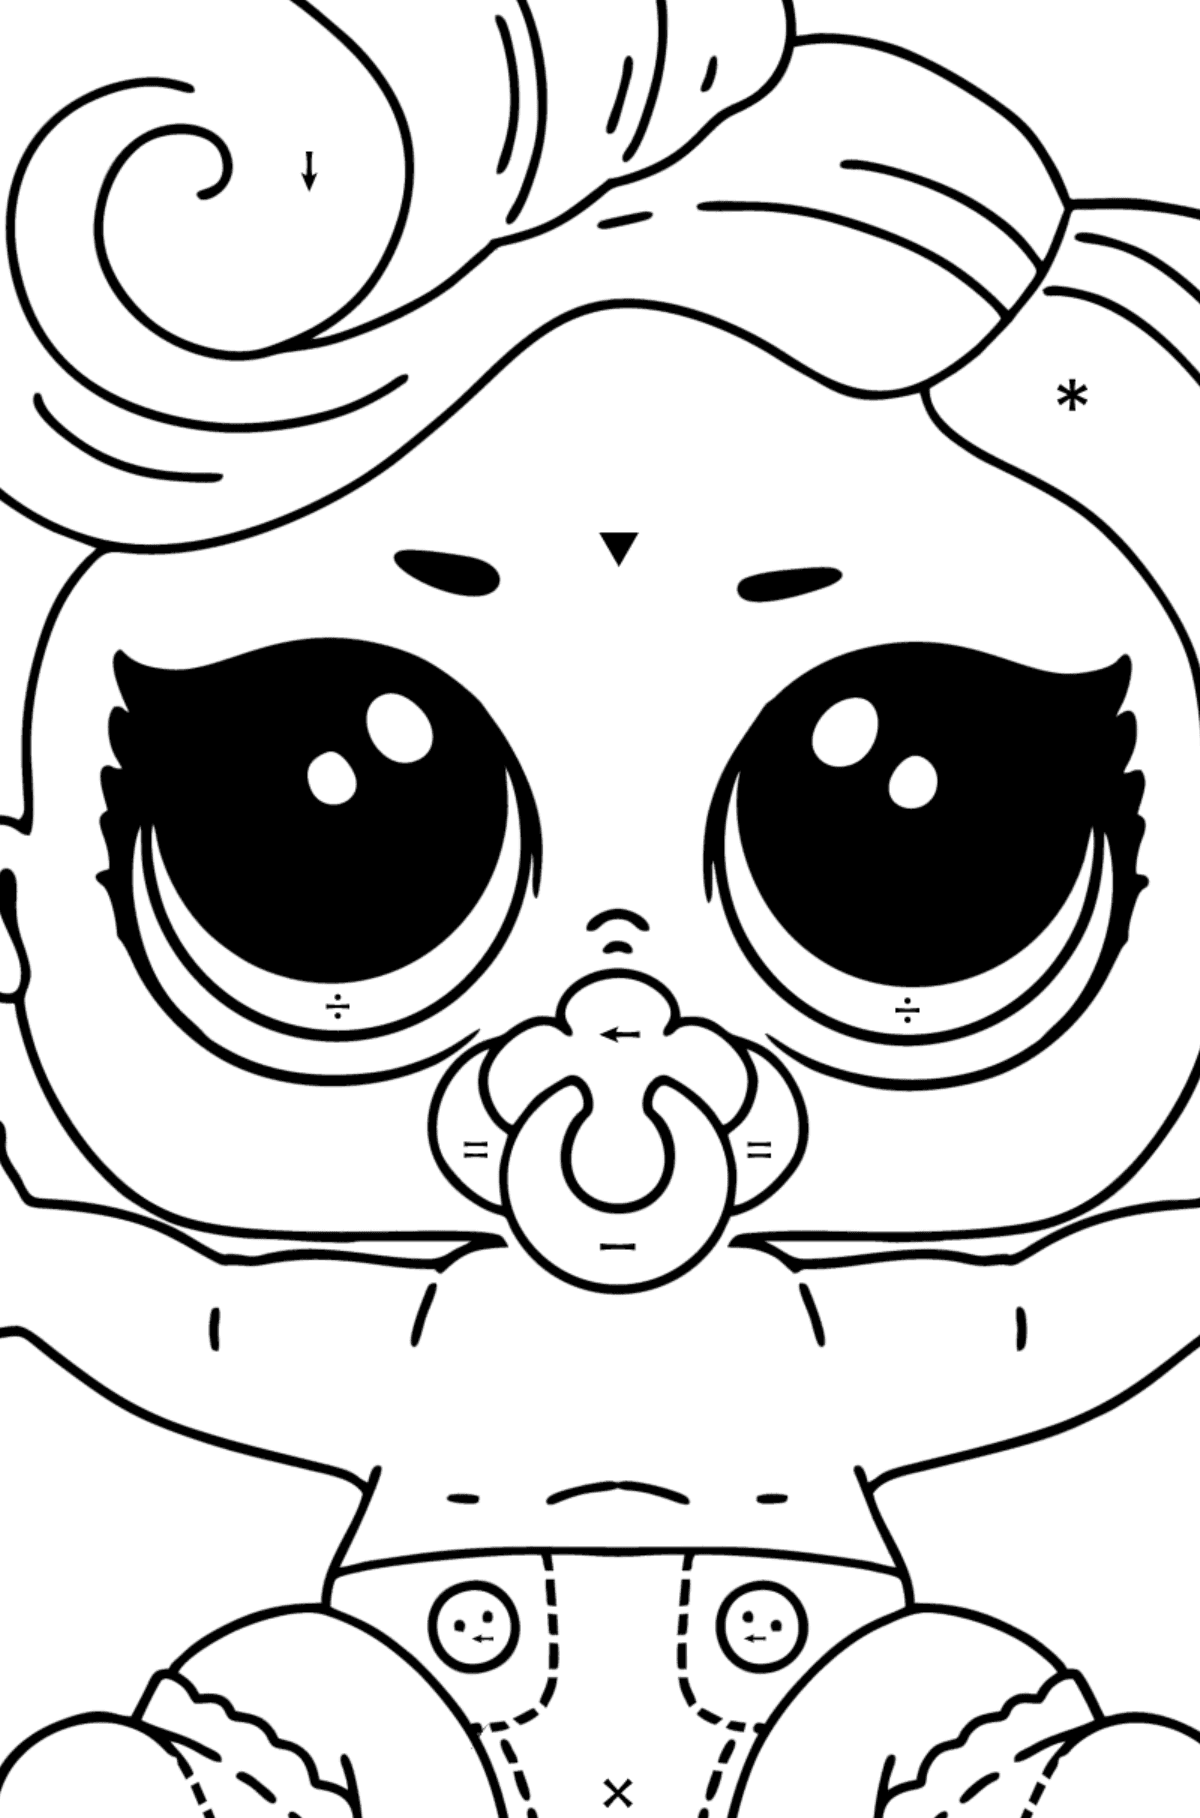 Coloring page LOL LIL Lux - Coloring by Symbols for Kids